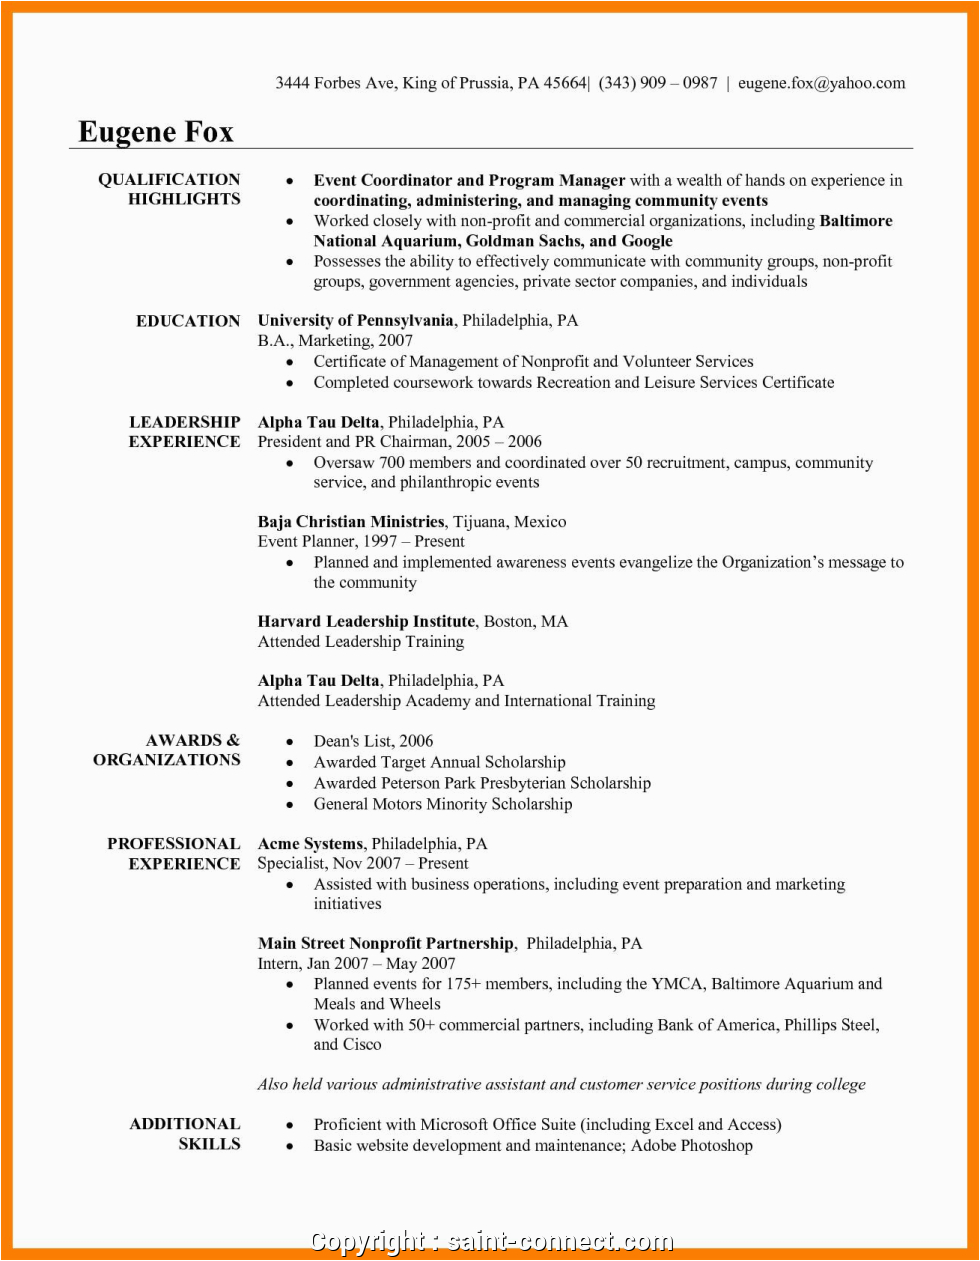 Sample Resume with Civil Service Eligibility Simple Civil Service Resume Best Resume formats forbes